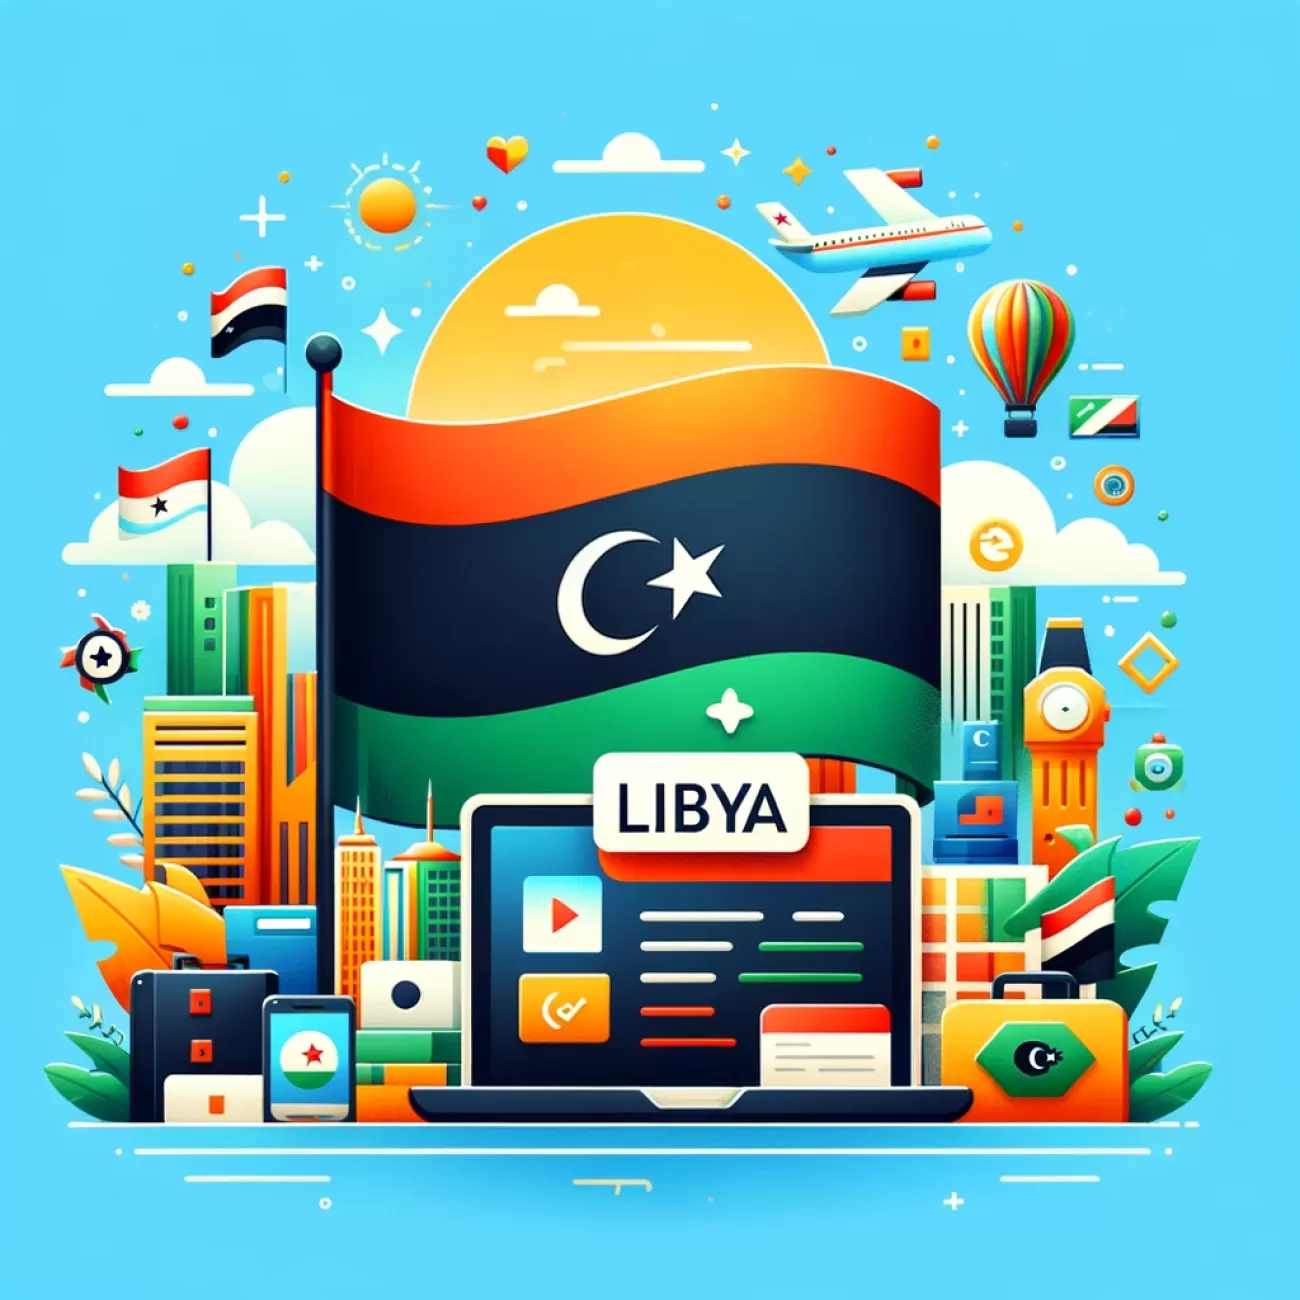 How to Apply for Libya Visa - Complete Guide to the Libya E-Visa Application Process